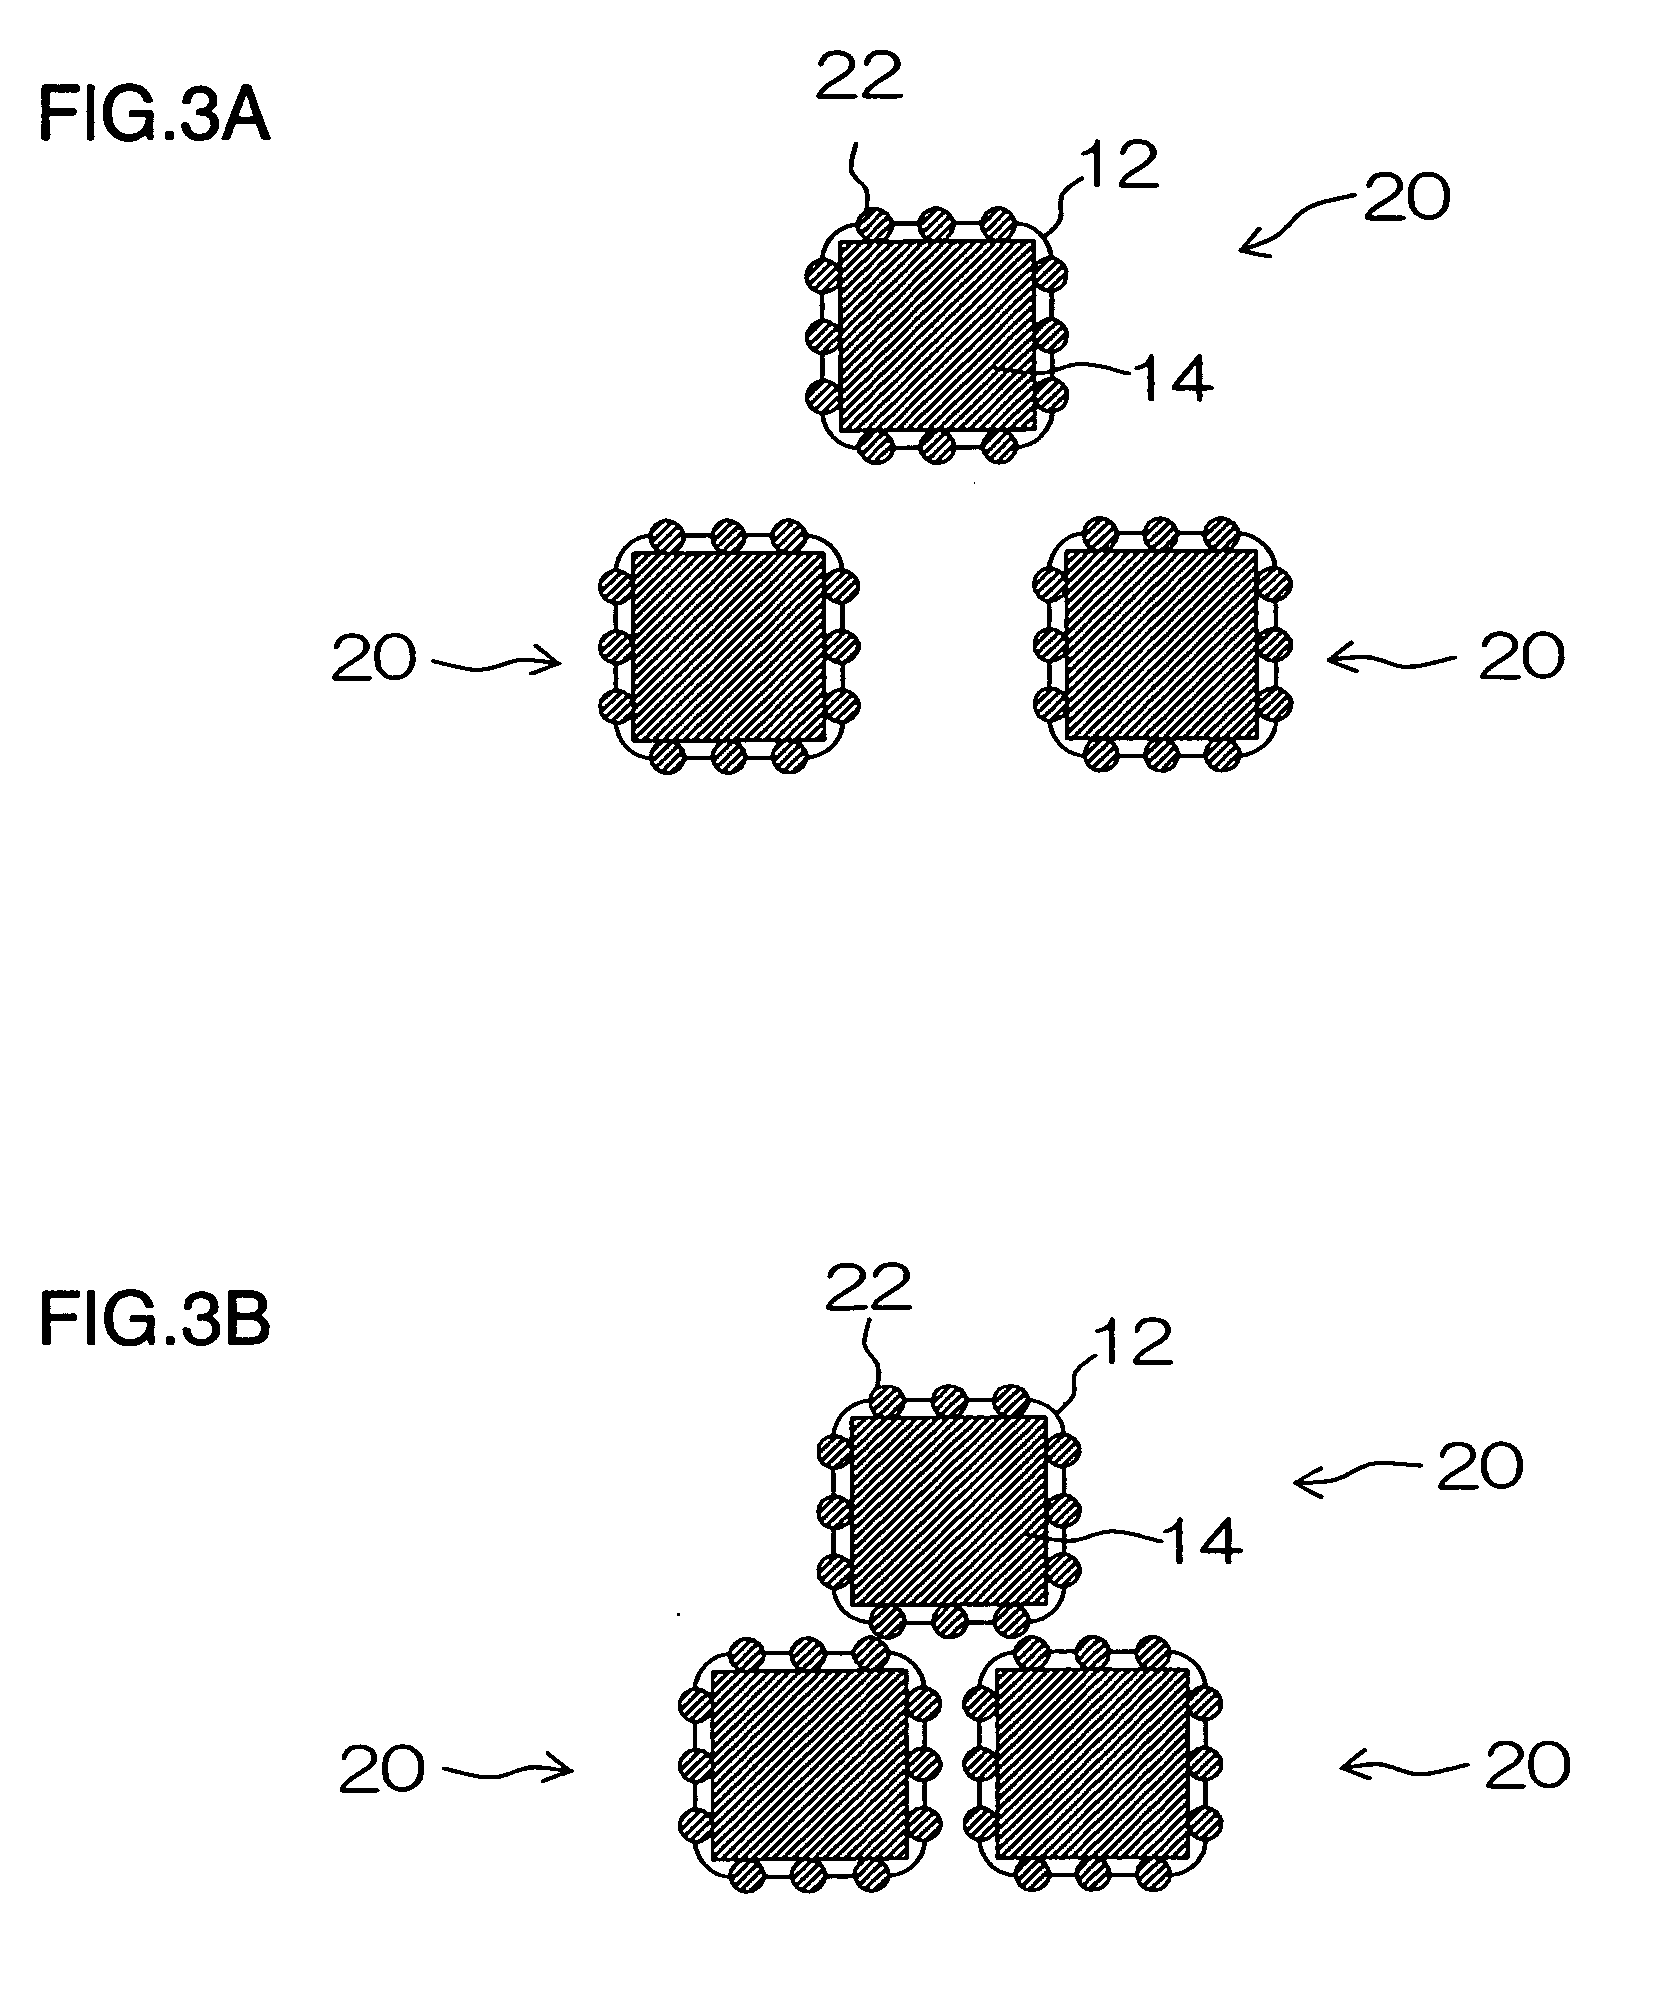 Entrapping immobilization pellets, process for producing the same, and method for storing or transporting the same